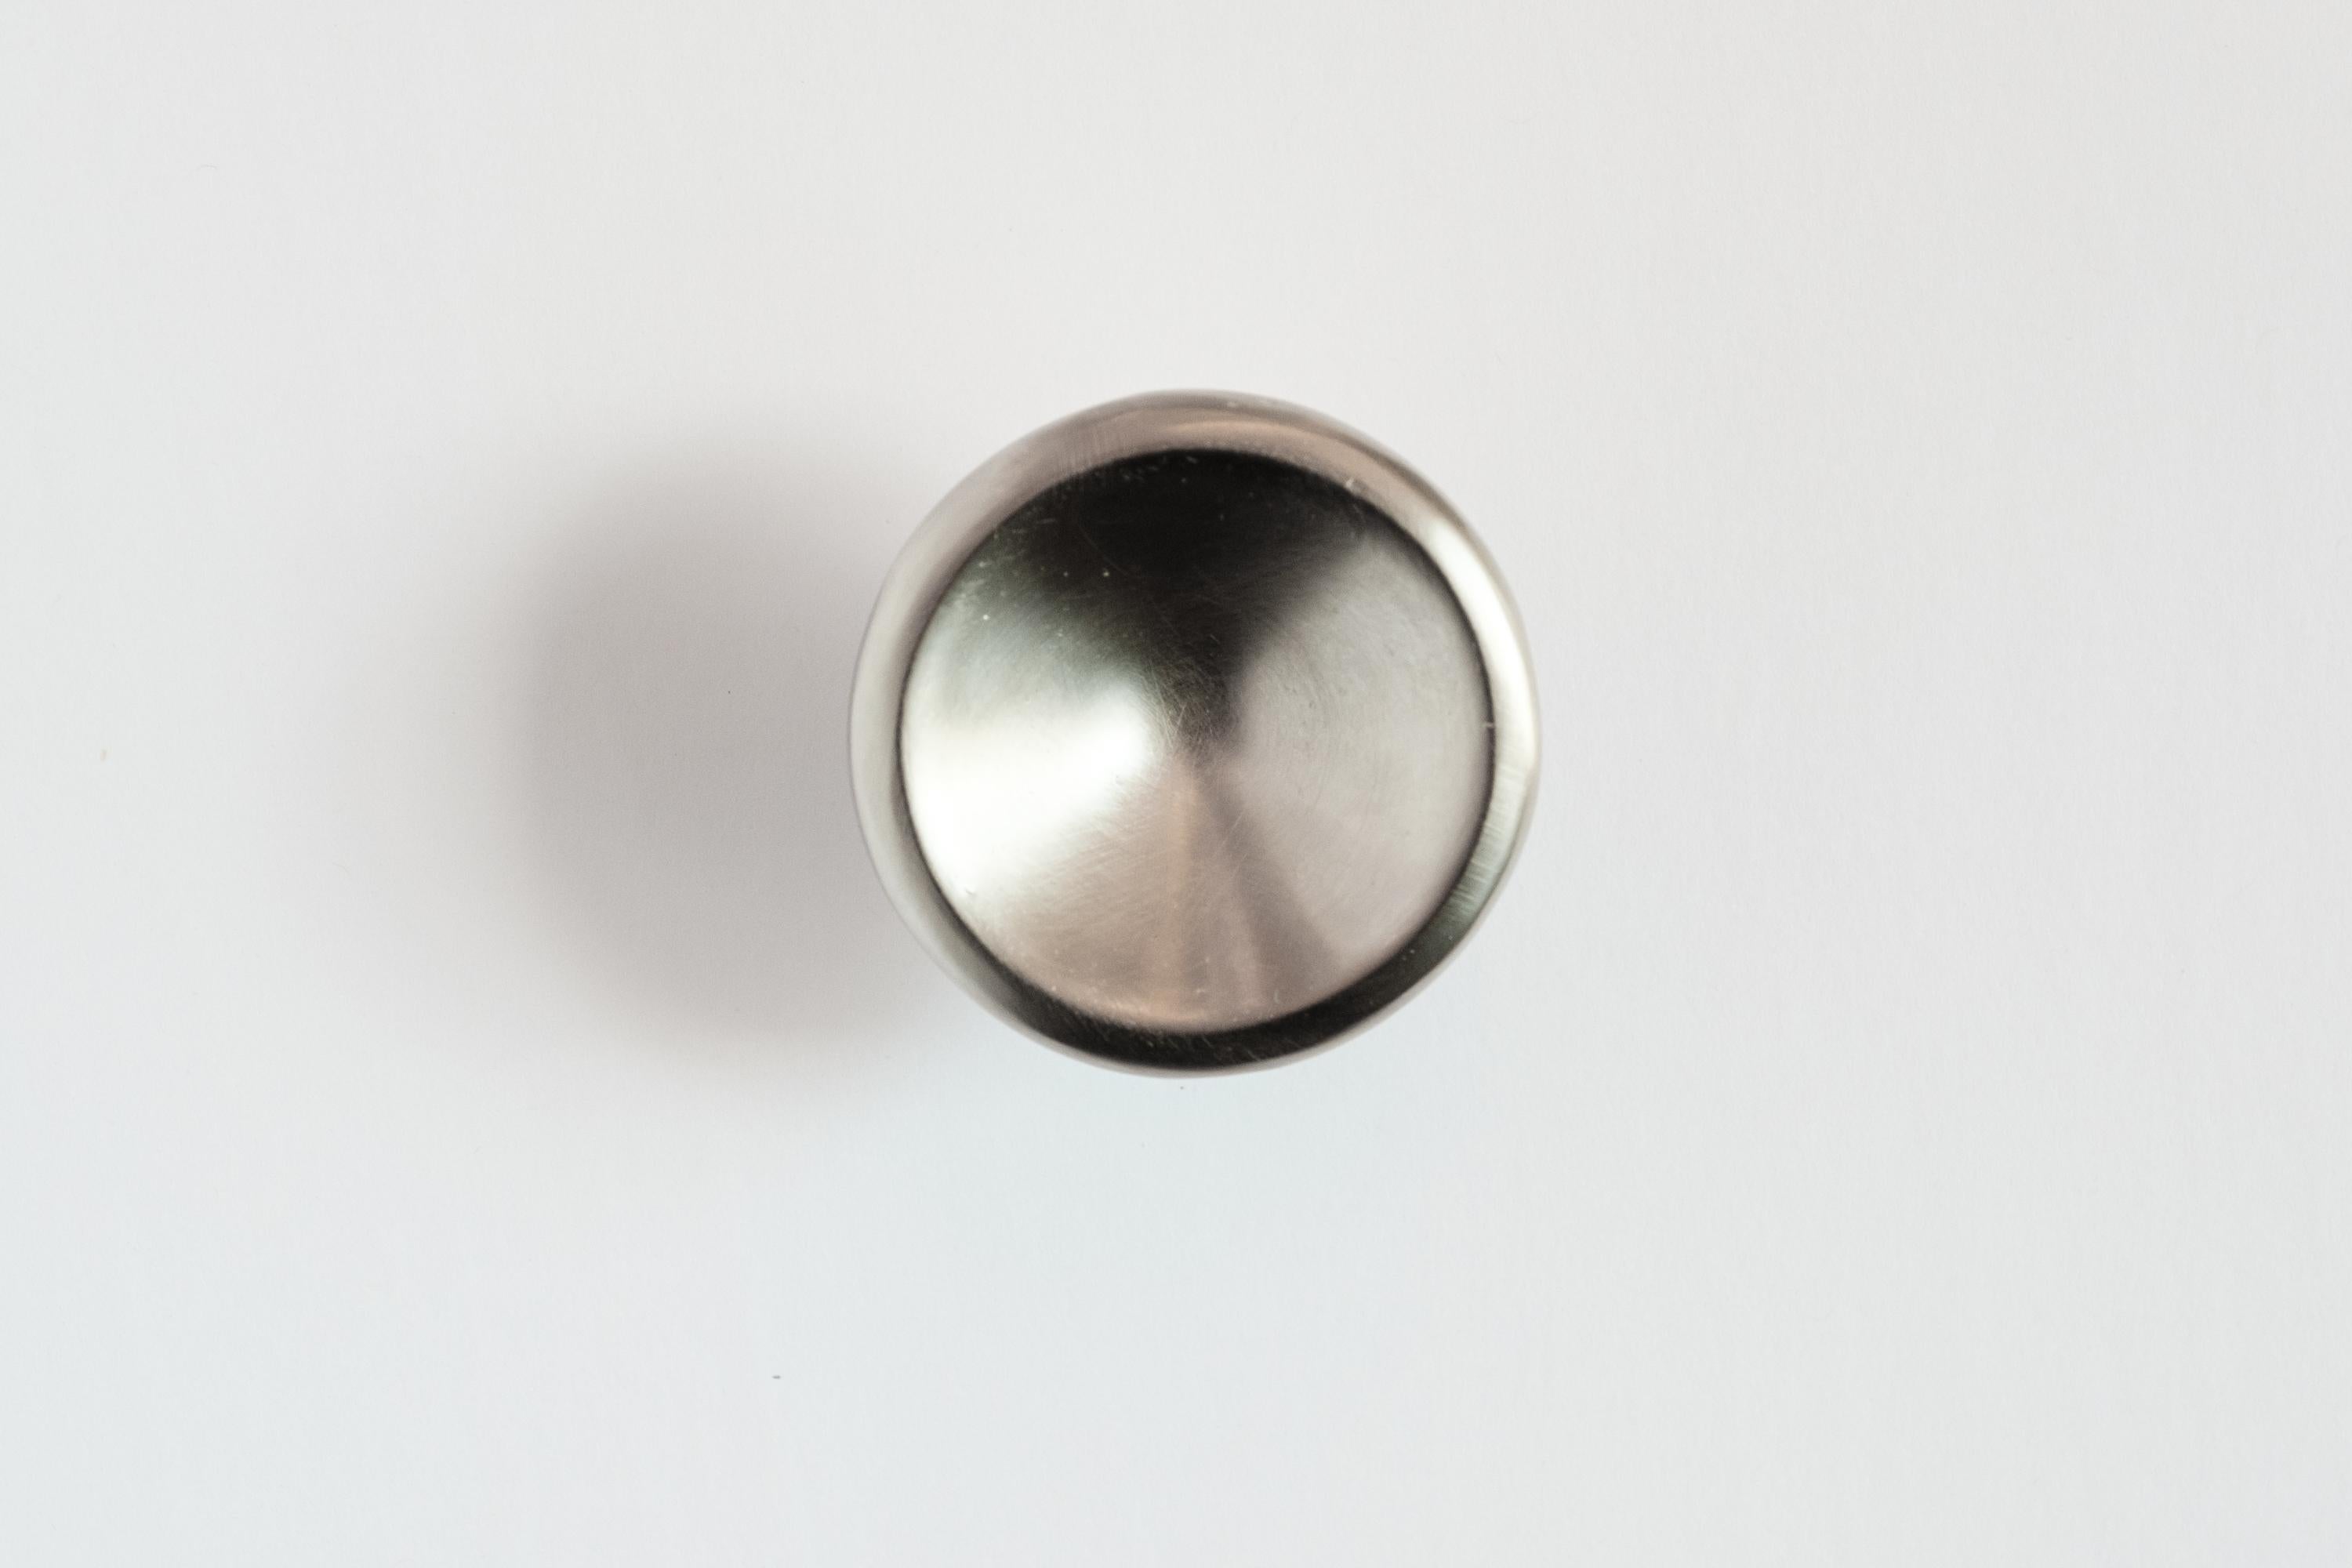 Carl Auböck model #8040-2 knob in nickel.

Designed in the 1950s, this versatile and Minimalist Viennese knob is executed in brushed nickel by Werkstätte Carl Auböck, Austria. Its minimalist design combines clean form with functionality.

Produced